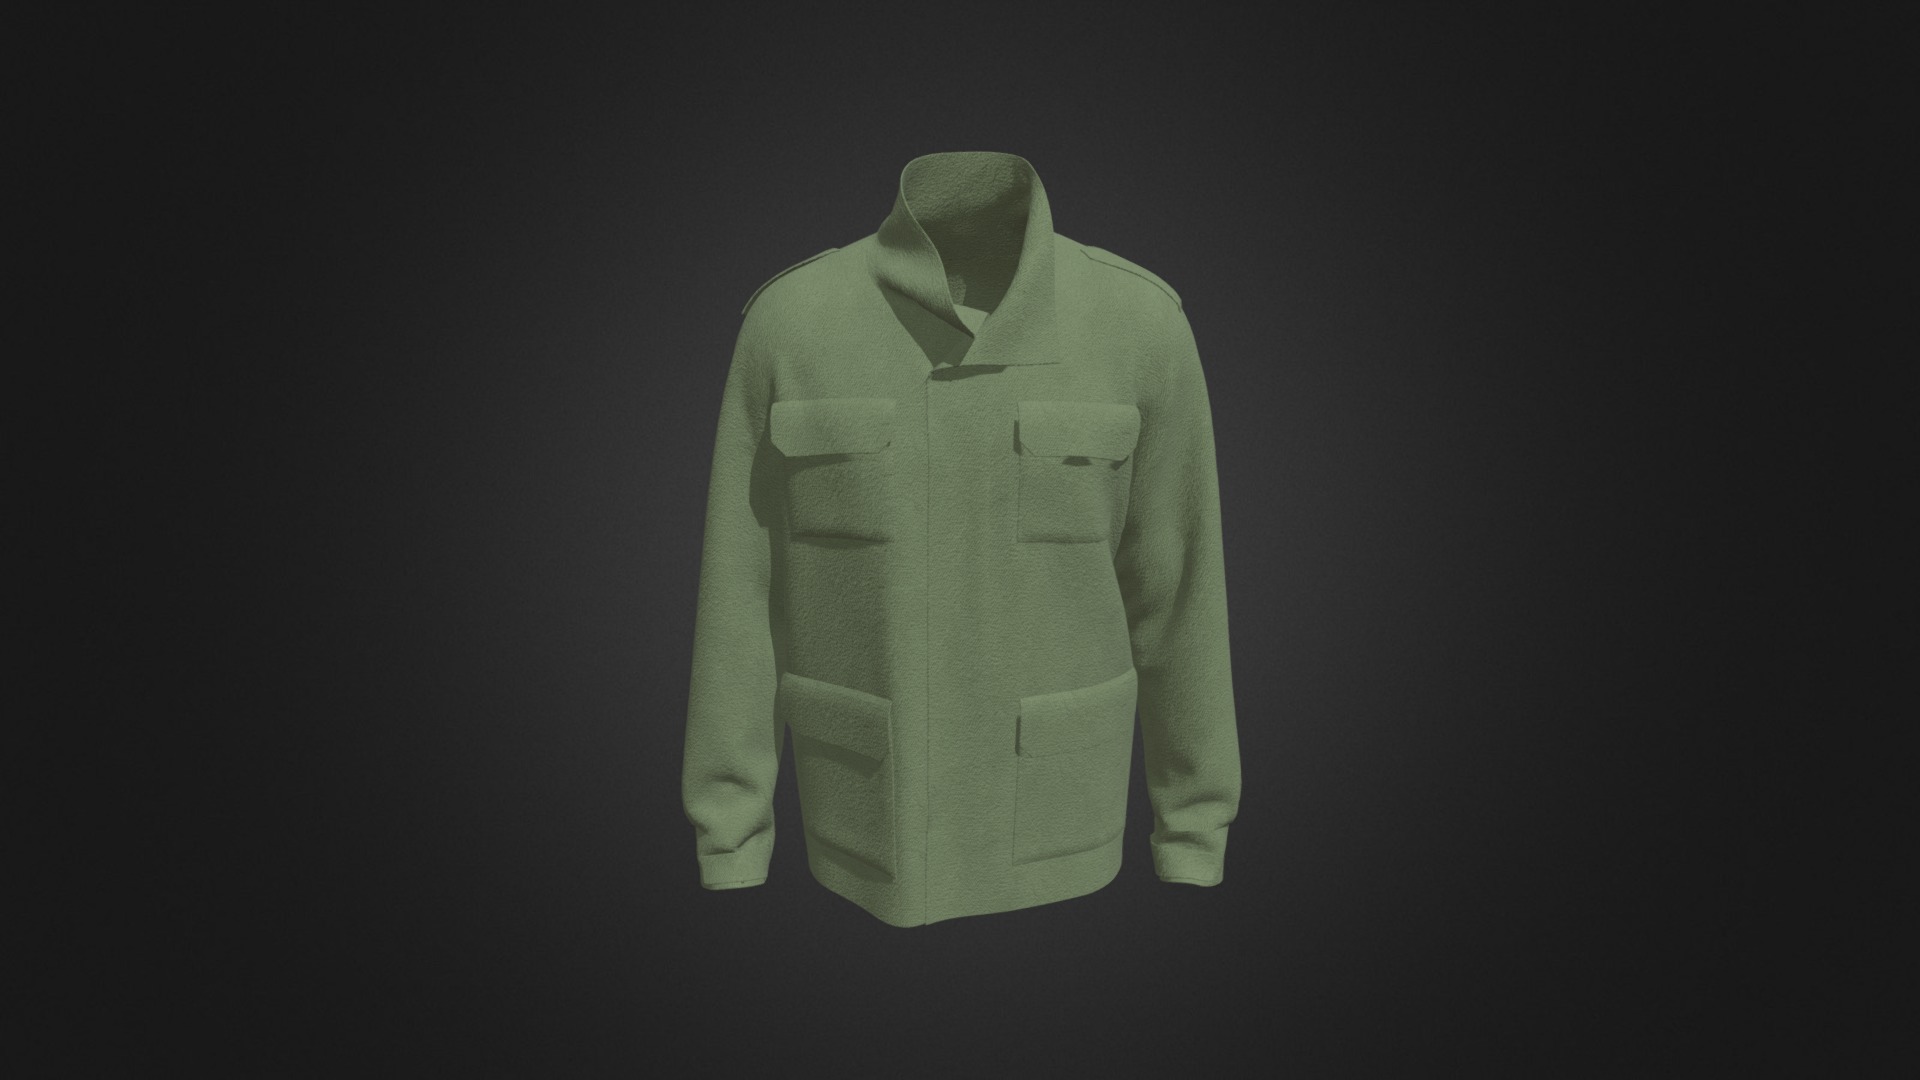 3D model Men’s Field Jacket - This is a 3D model of the Men's Field Jacket. The 3D model is about a green shirt on a black background.